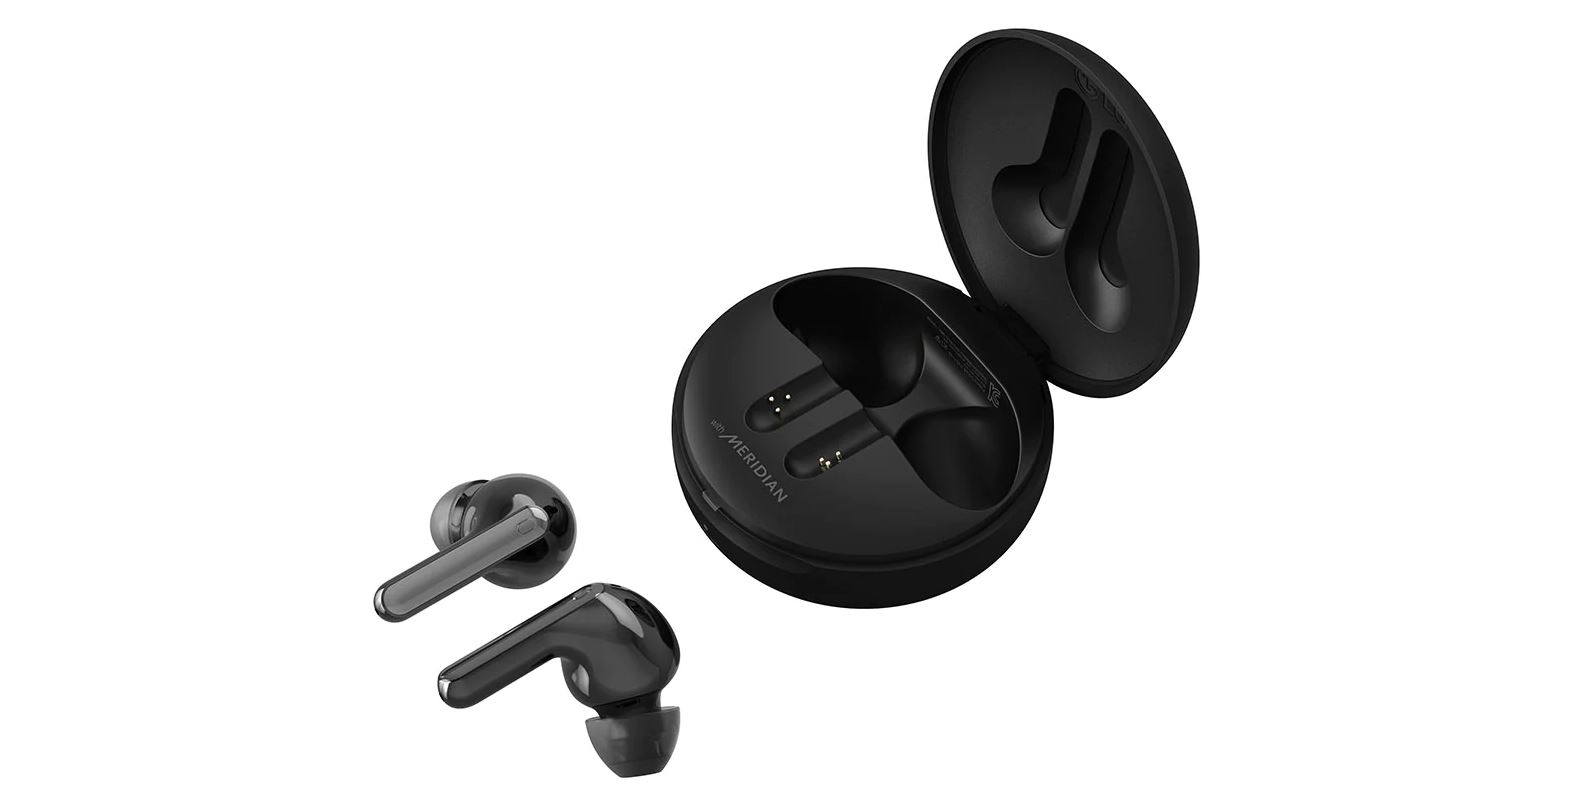 LG’S NEW EARBUDS DEBUT IN THE UAE